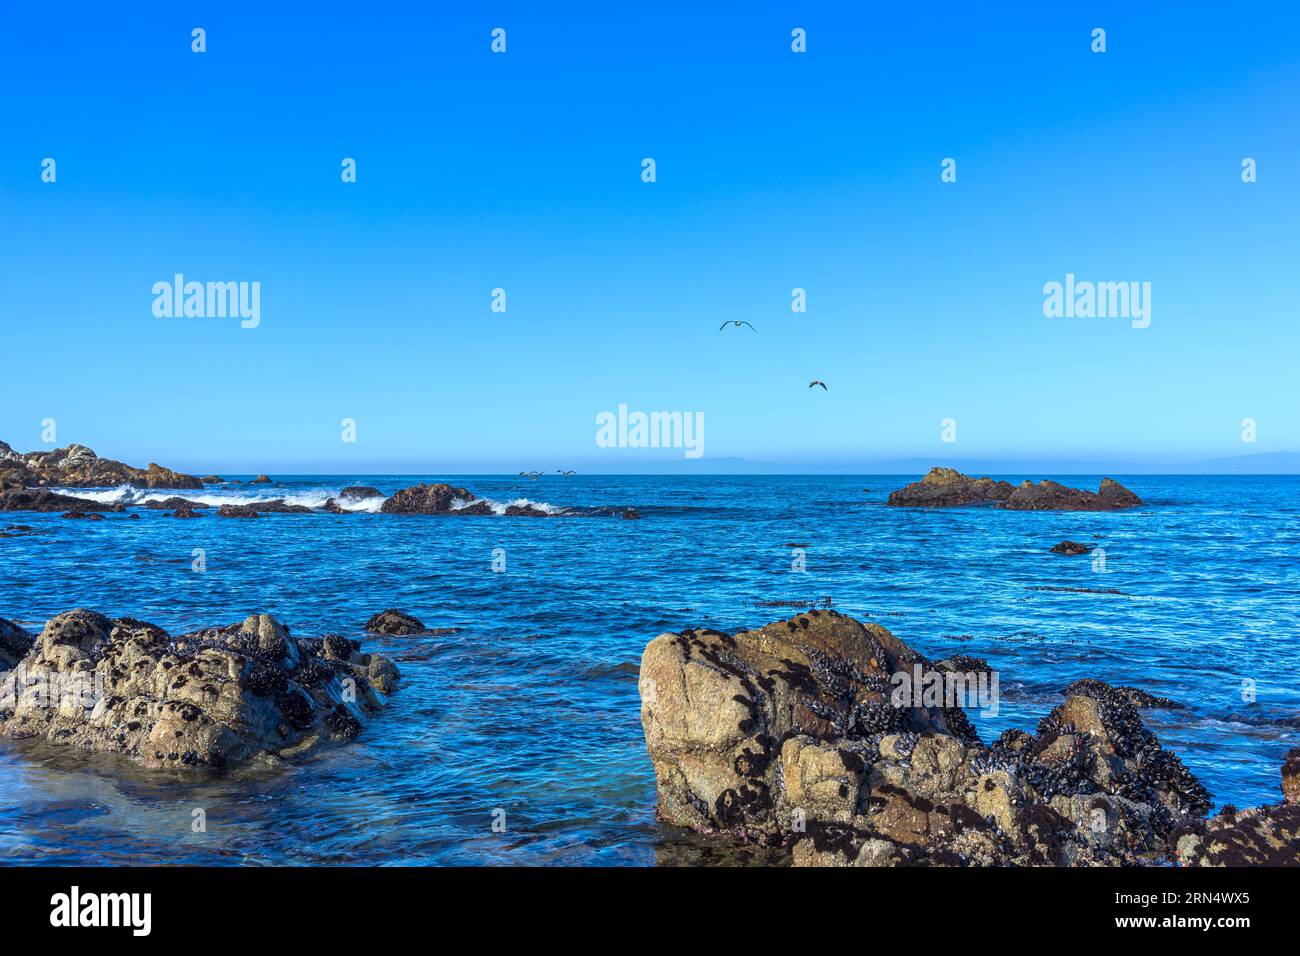 Monterey Bay ocean view with boulders and birds flying away Stock Photo